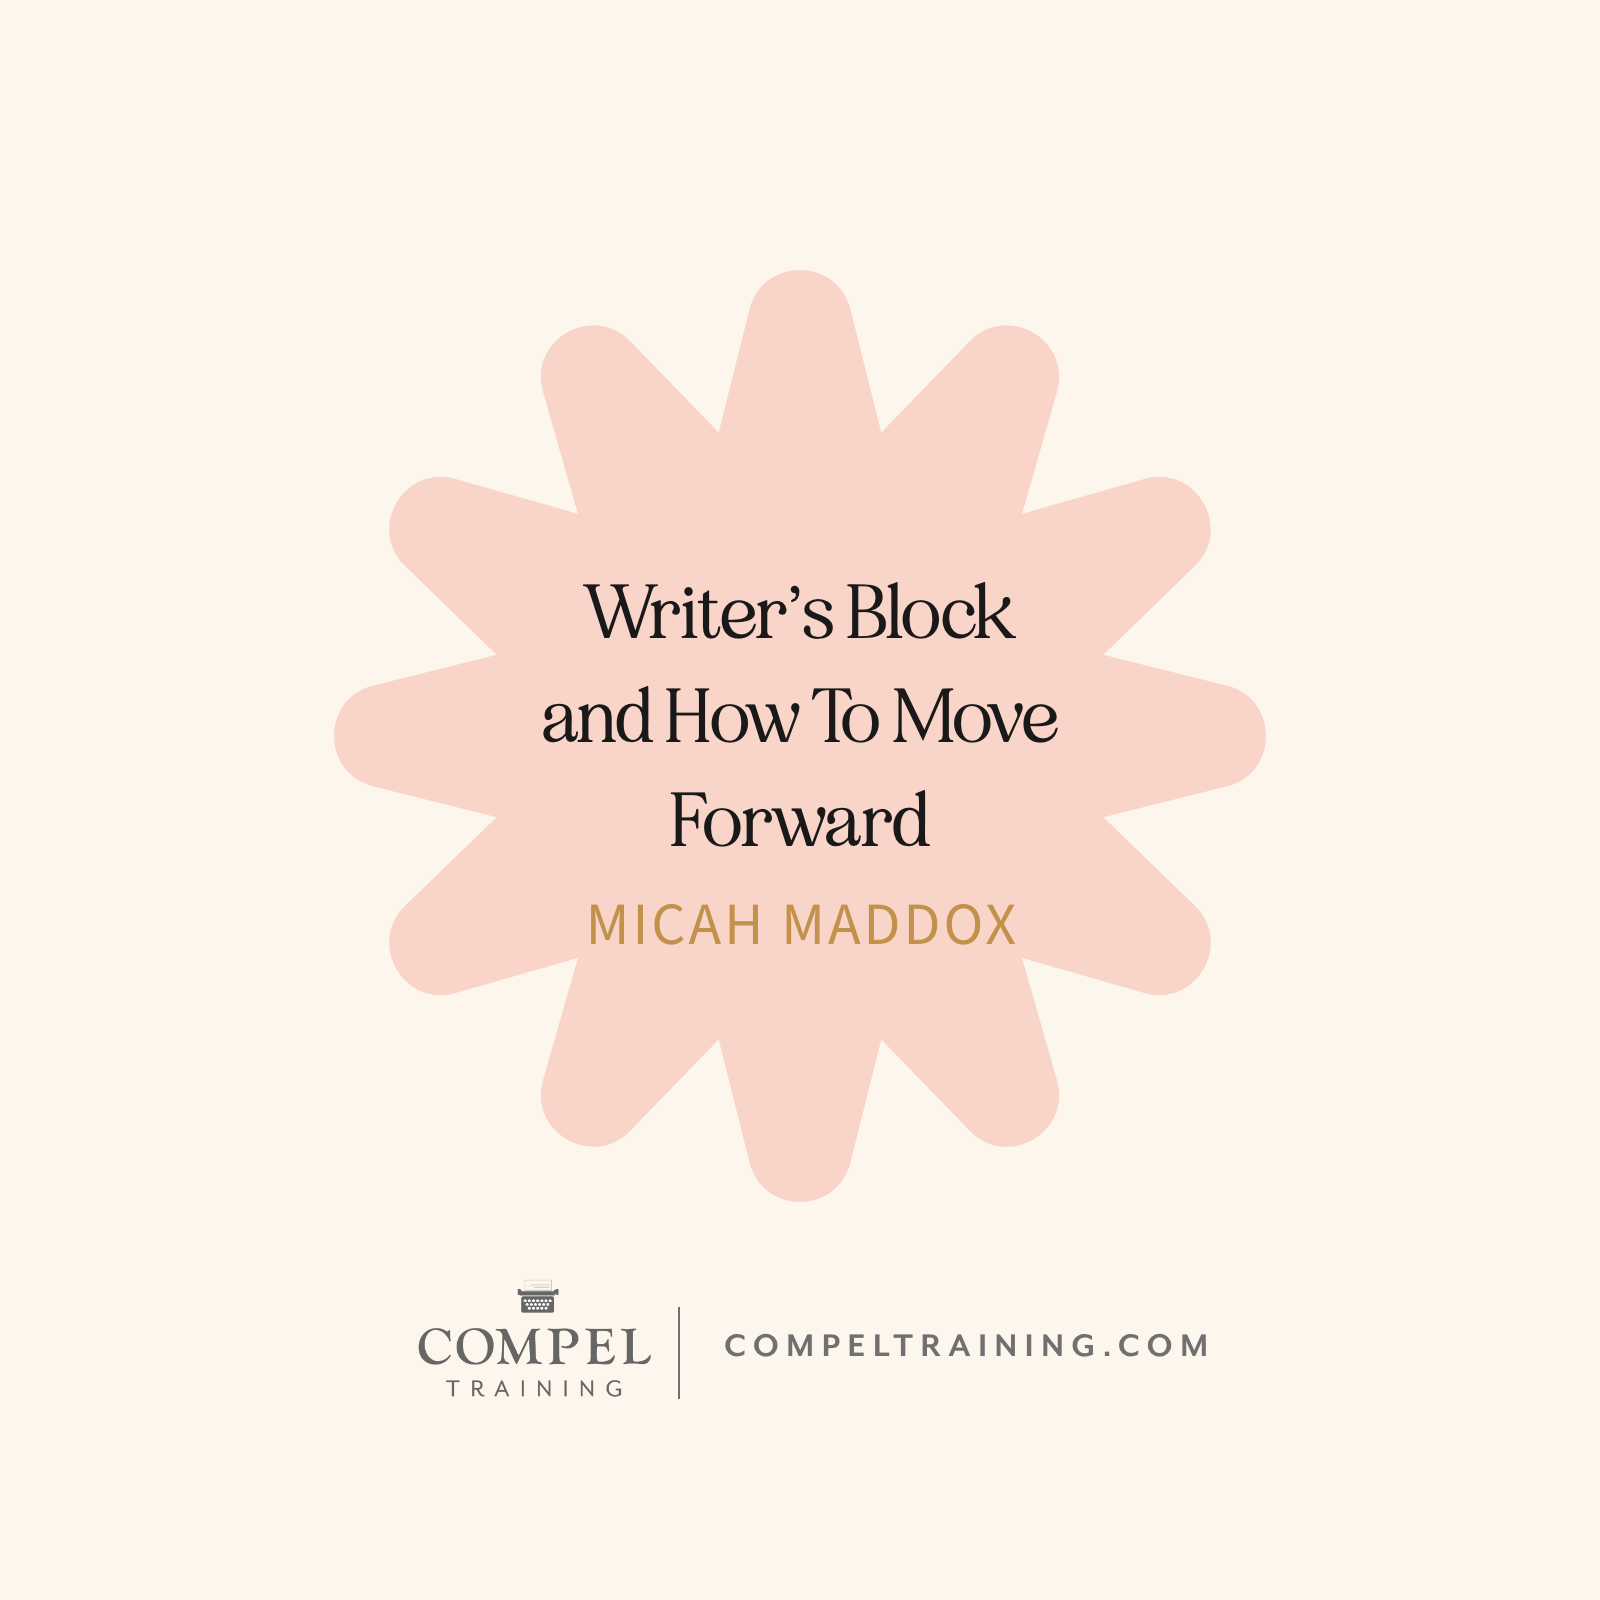 If you’re a writer, chances are you’ve had the dreaded writer’s block at some point in your journey. It can creep in at any time, throwing us off our creative game and leaving us wondering how we got there! Even worse, we ask the question, “now what?” We won’t leave you hanging! Below are some tips to get you out of that writing rut and back on the page.